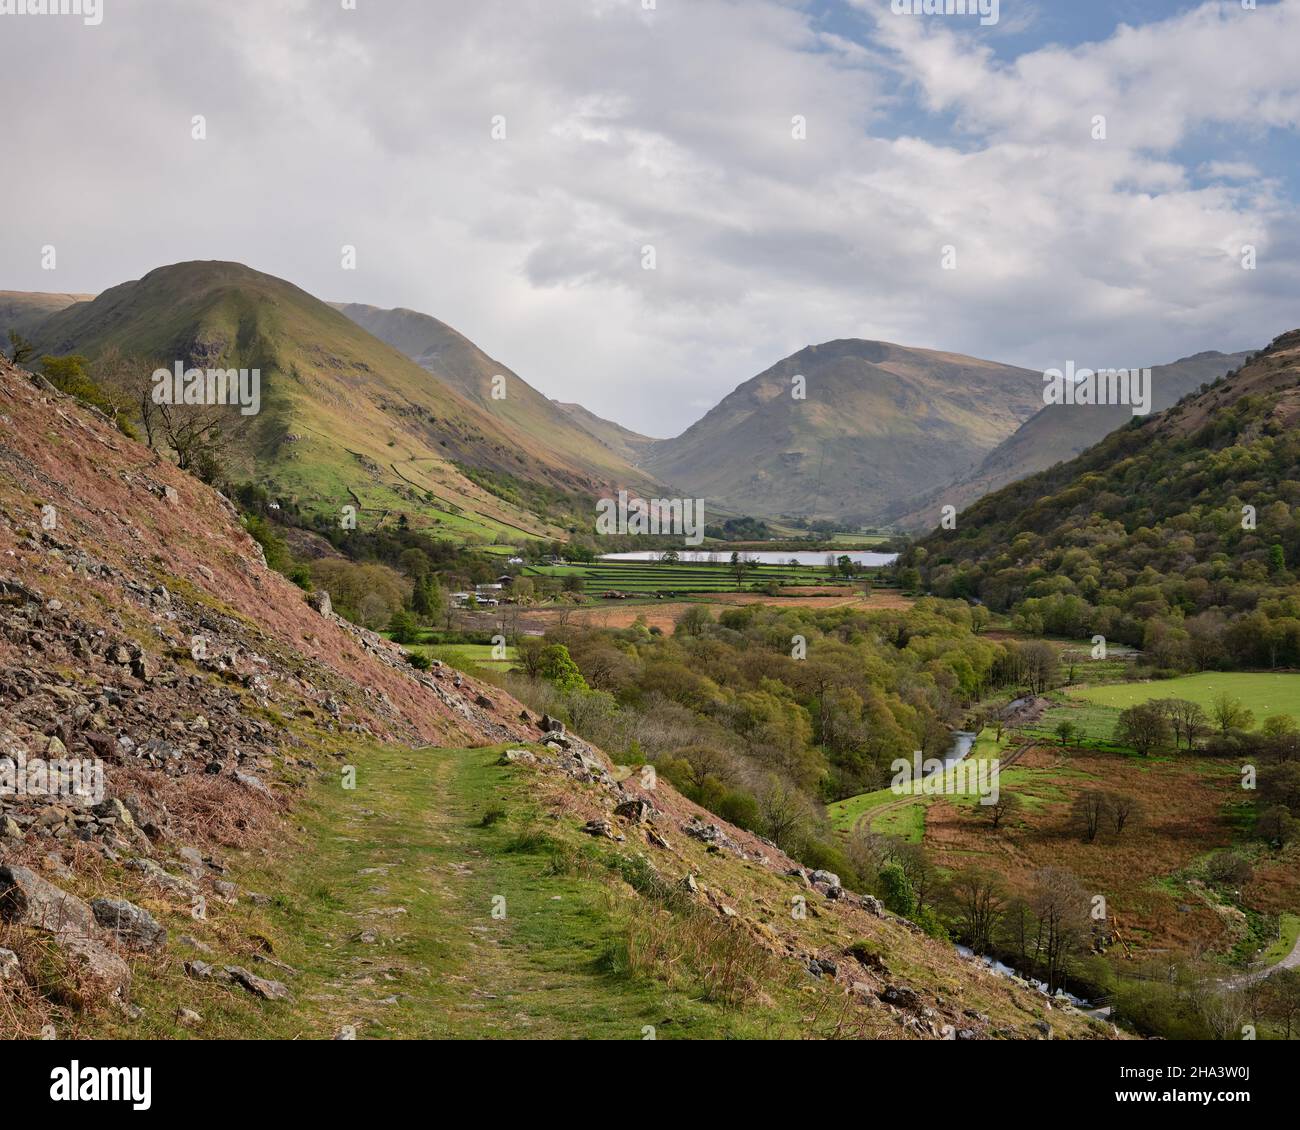 Footpath descending from Boredale Hause to Hartsop and Patterdale. Red Screes visible above Brothers Water, Lake District, UK Stock Photo